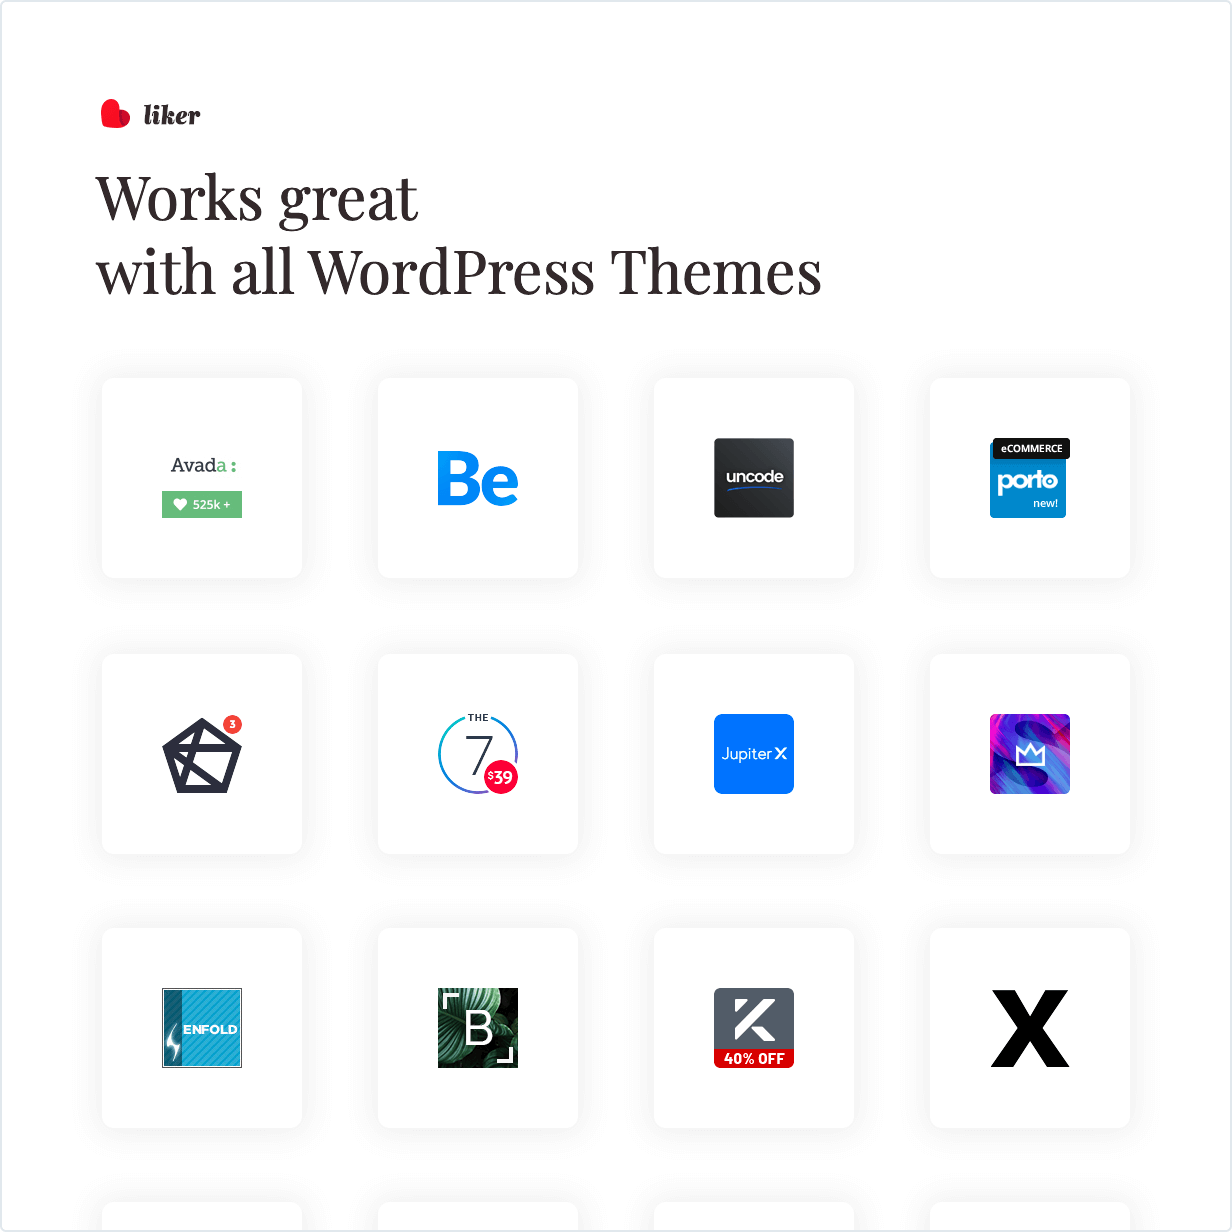 Works great with all WordPress Themes